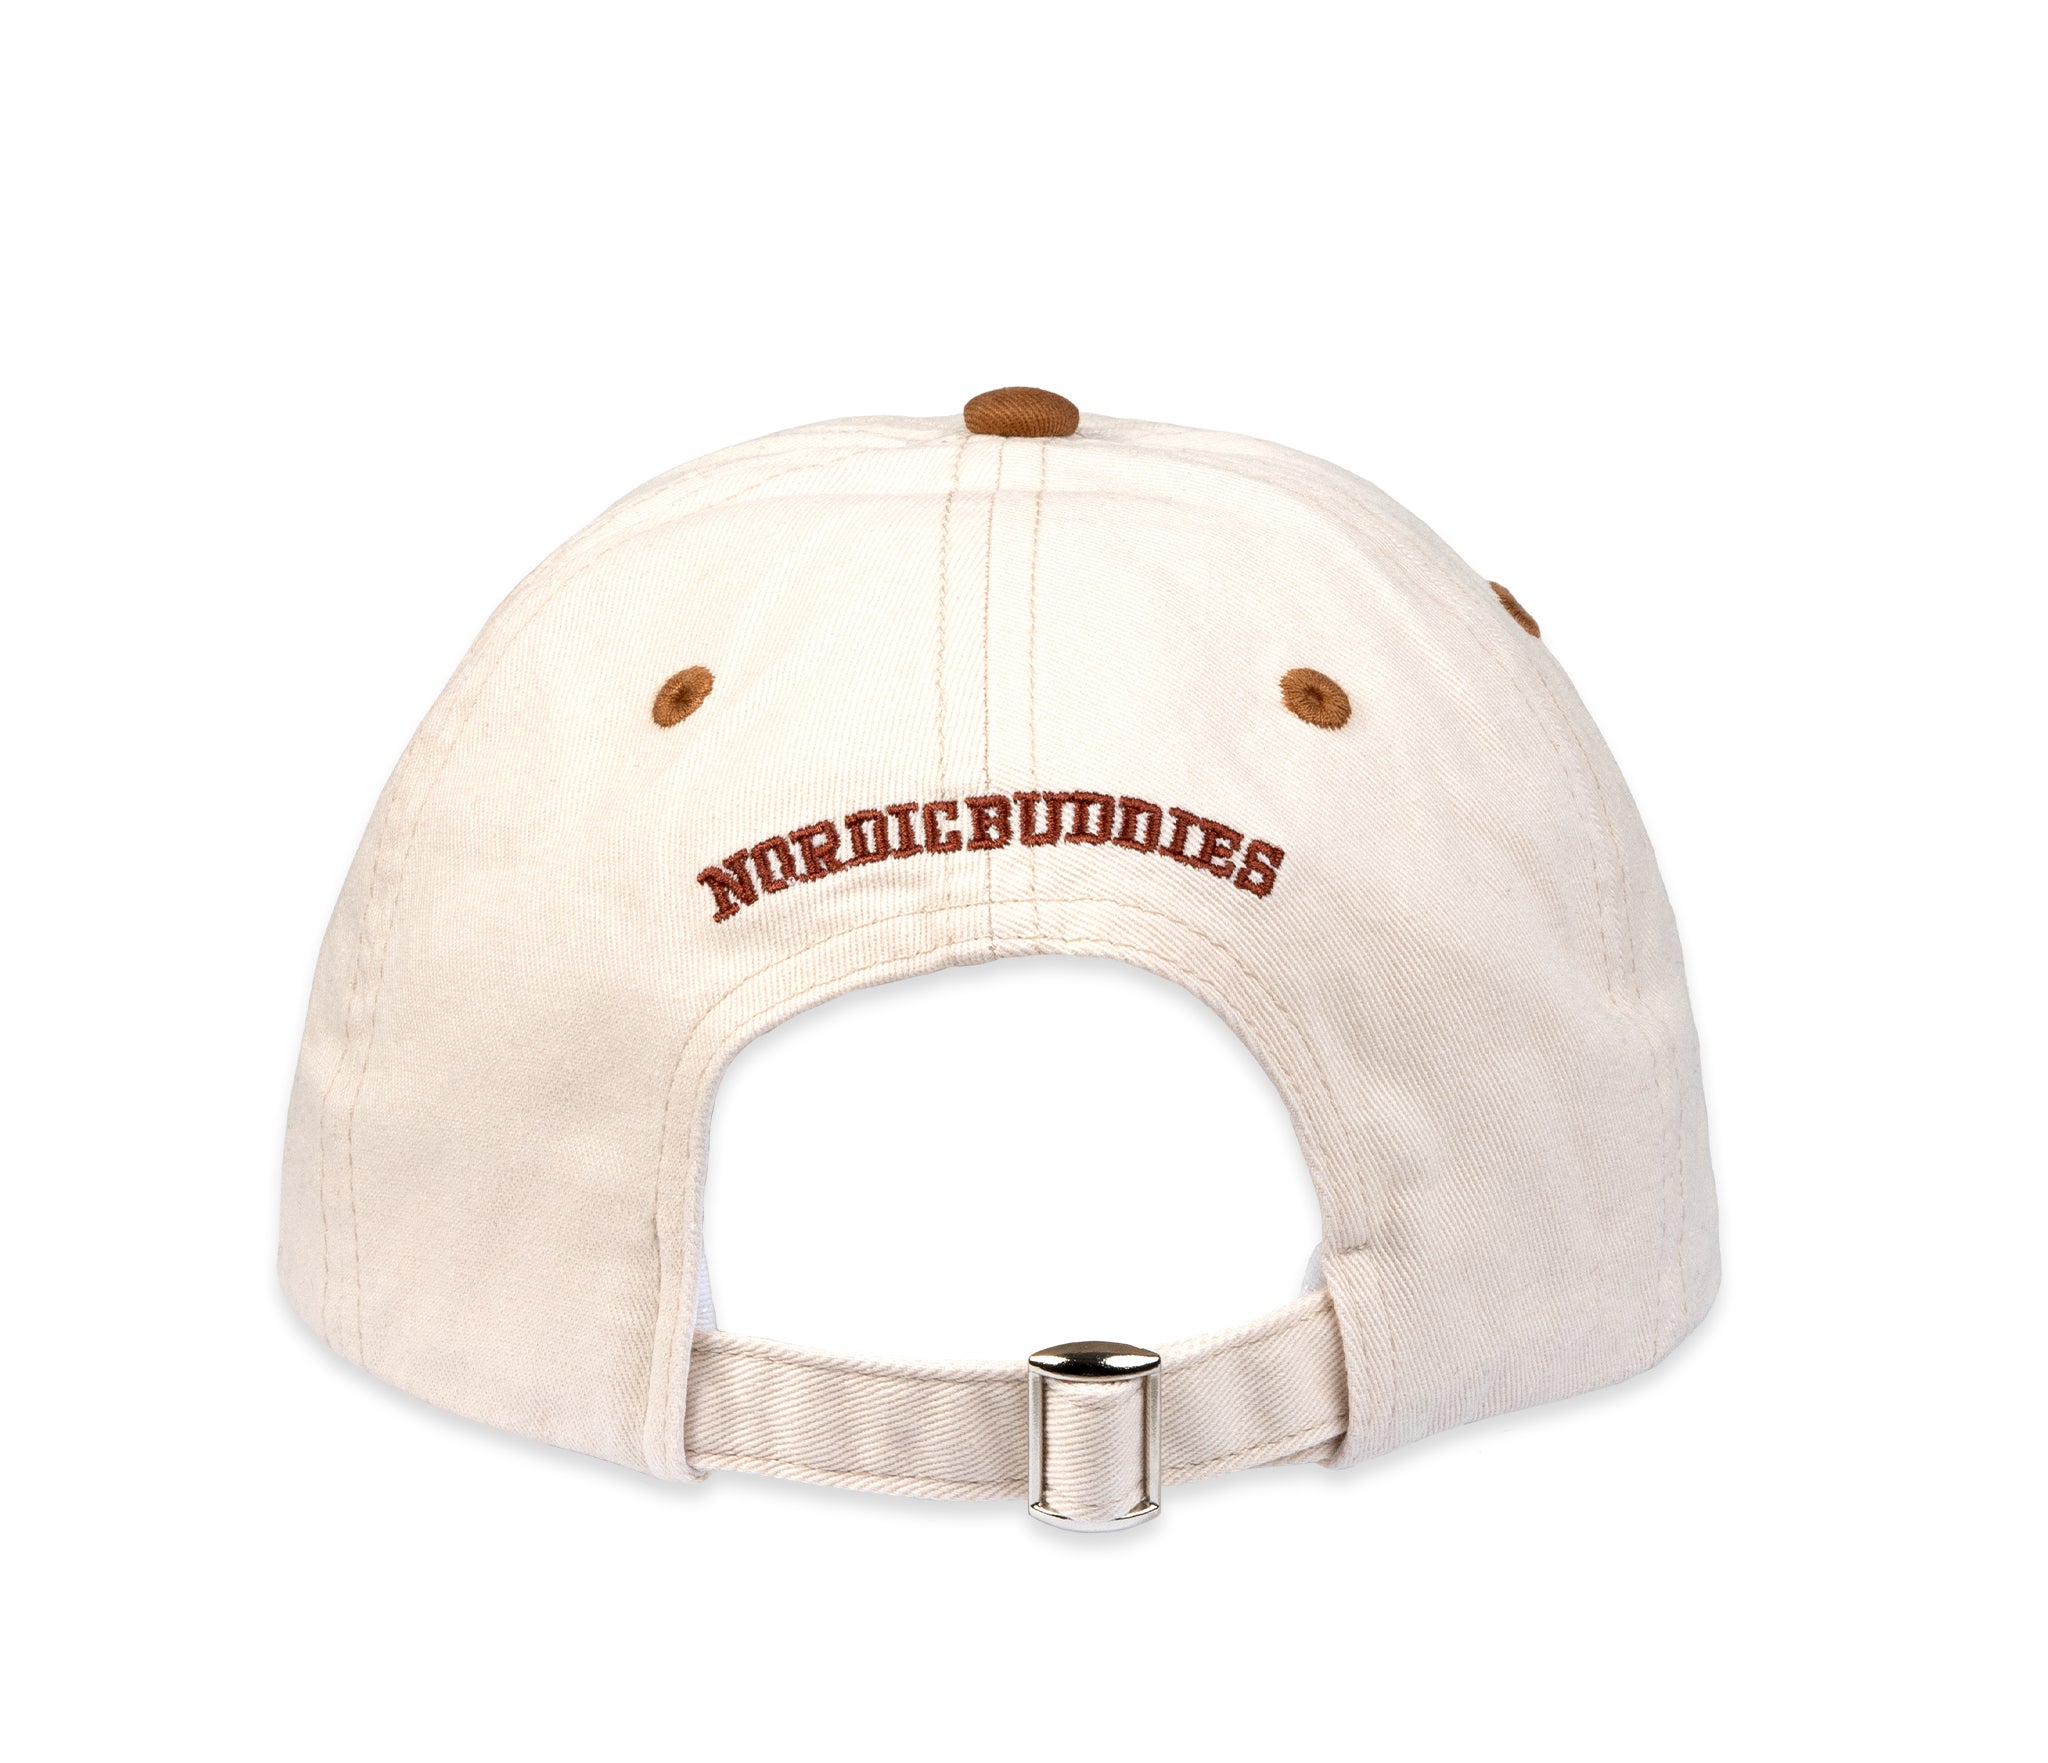 Sniff's Thoughts Baseball Adult Cap - White and Brown